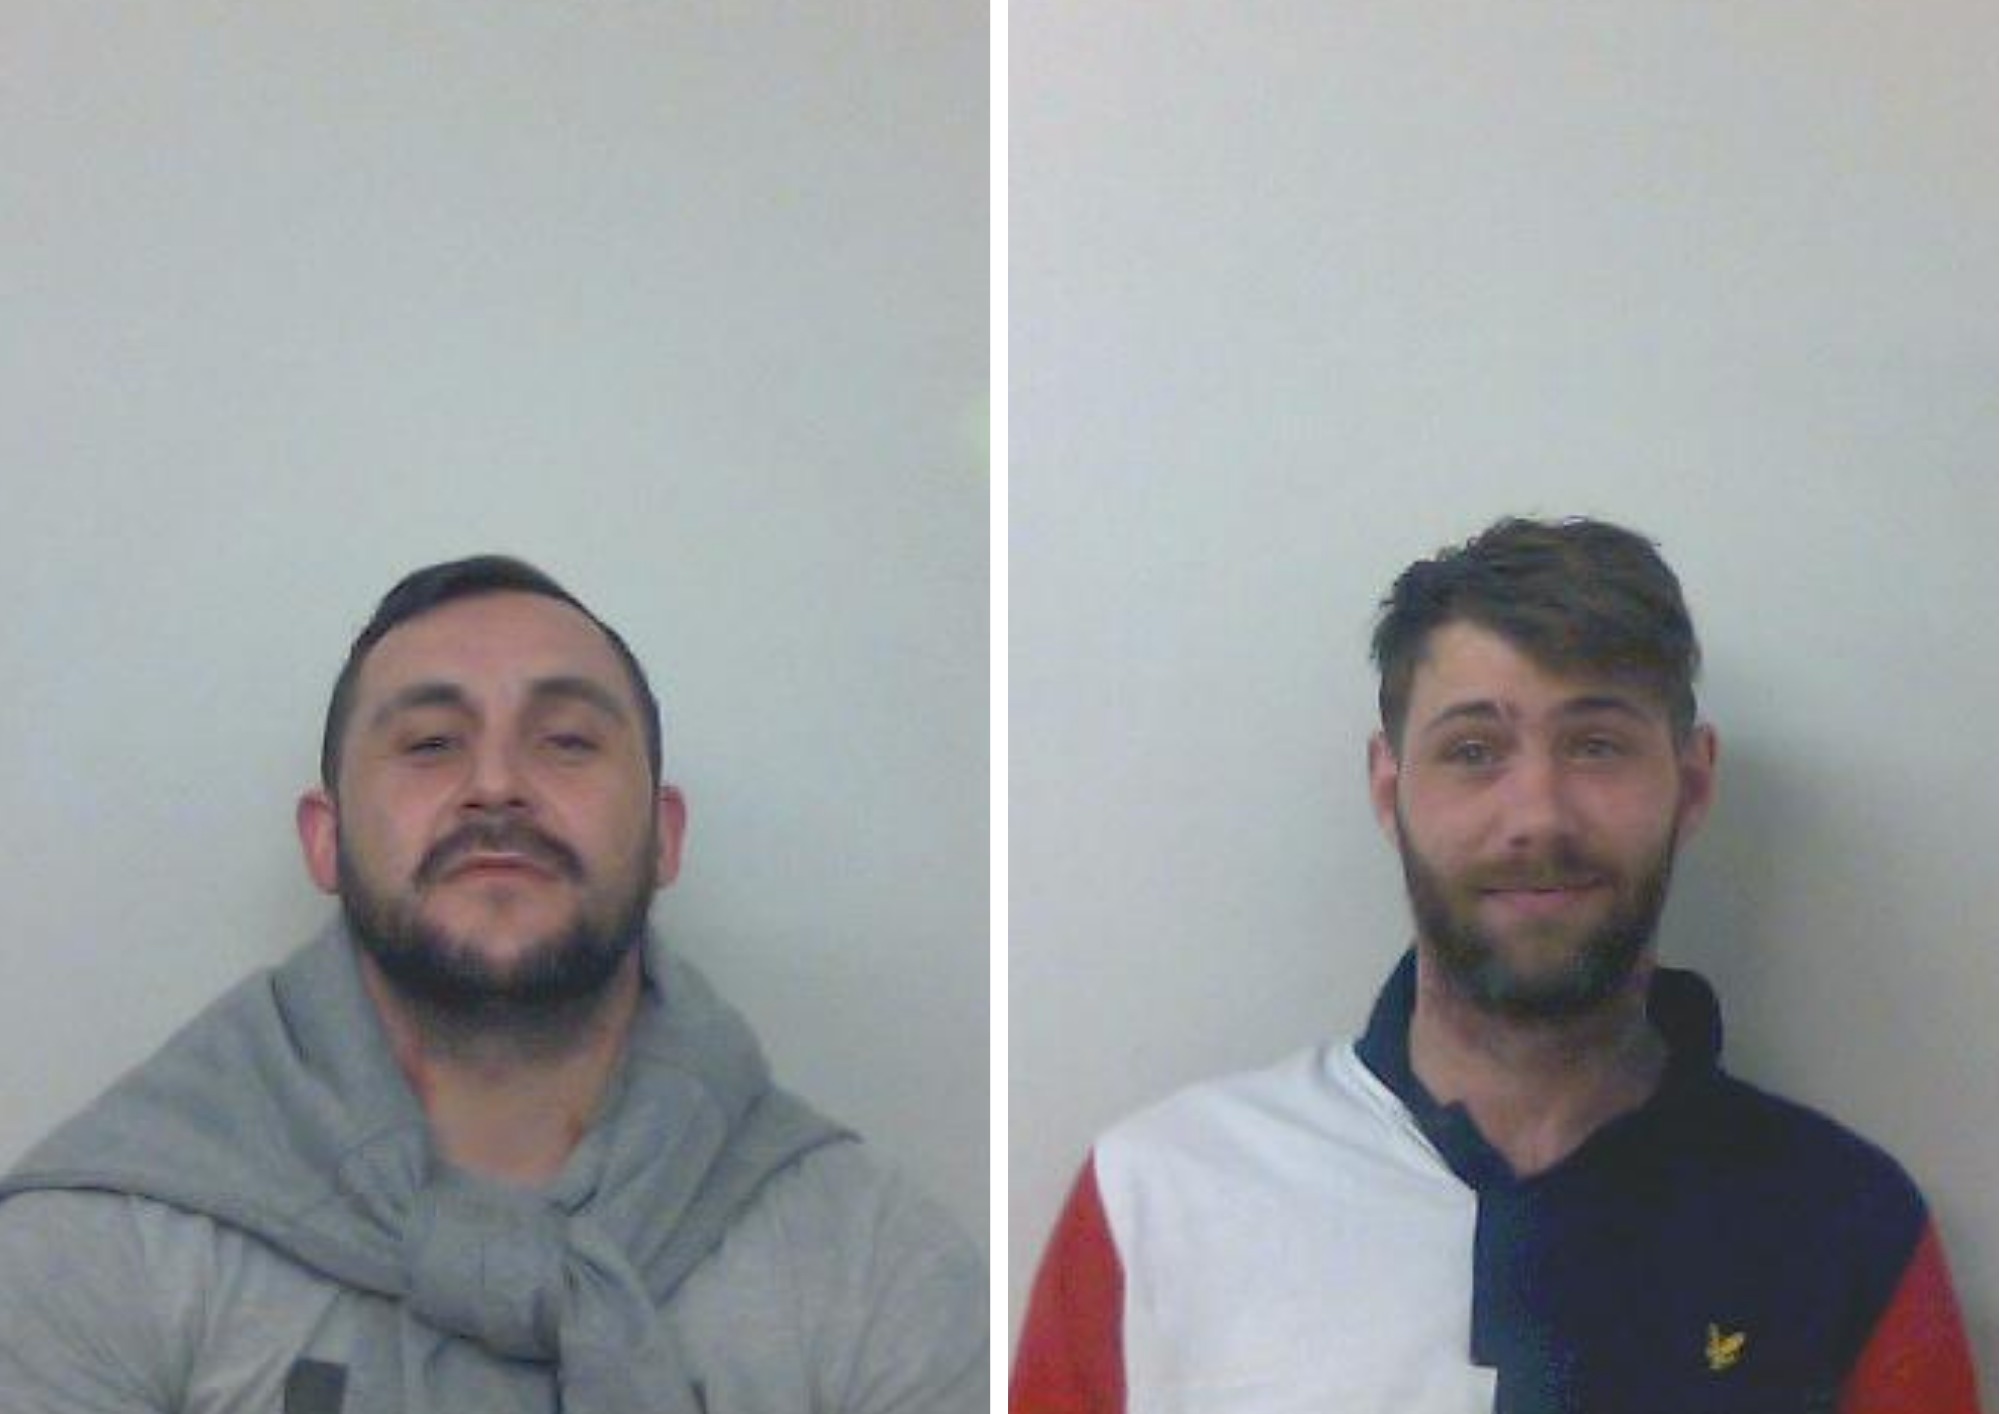 Luke Jarvis (left) and Arren Tomkins (right). Pictures: Thames Valley Police